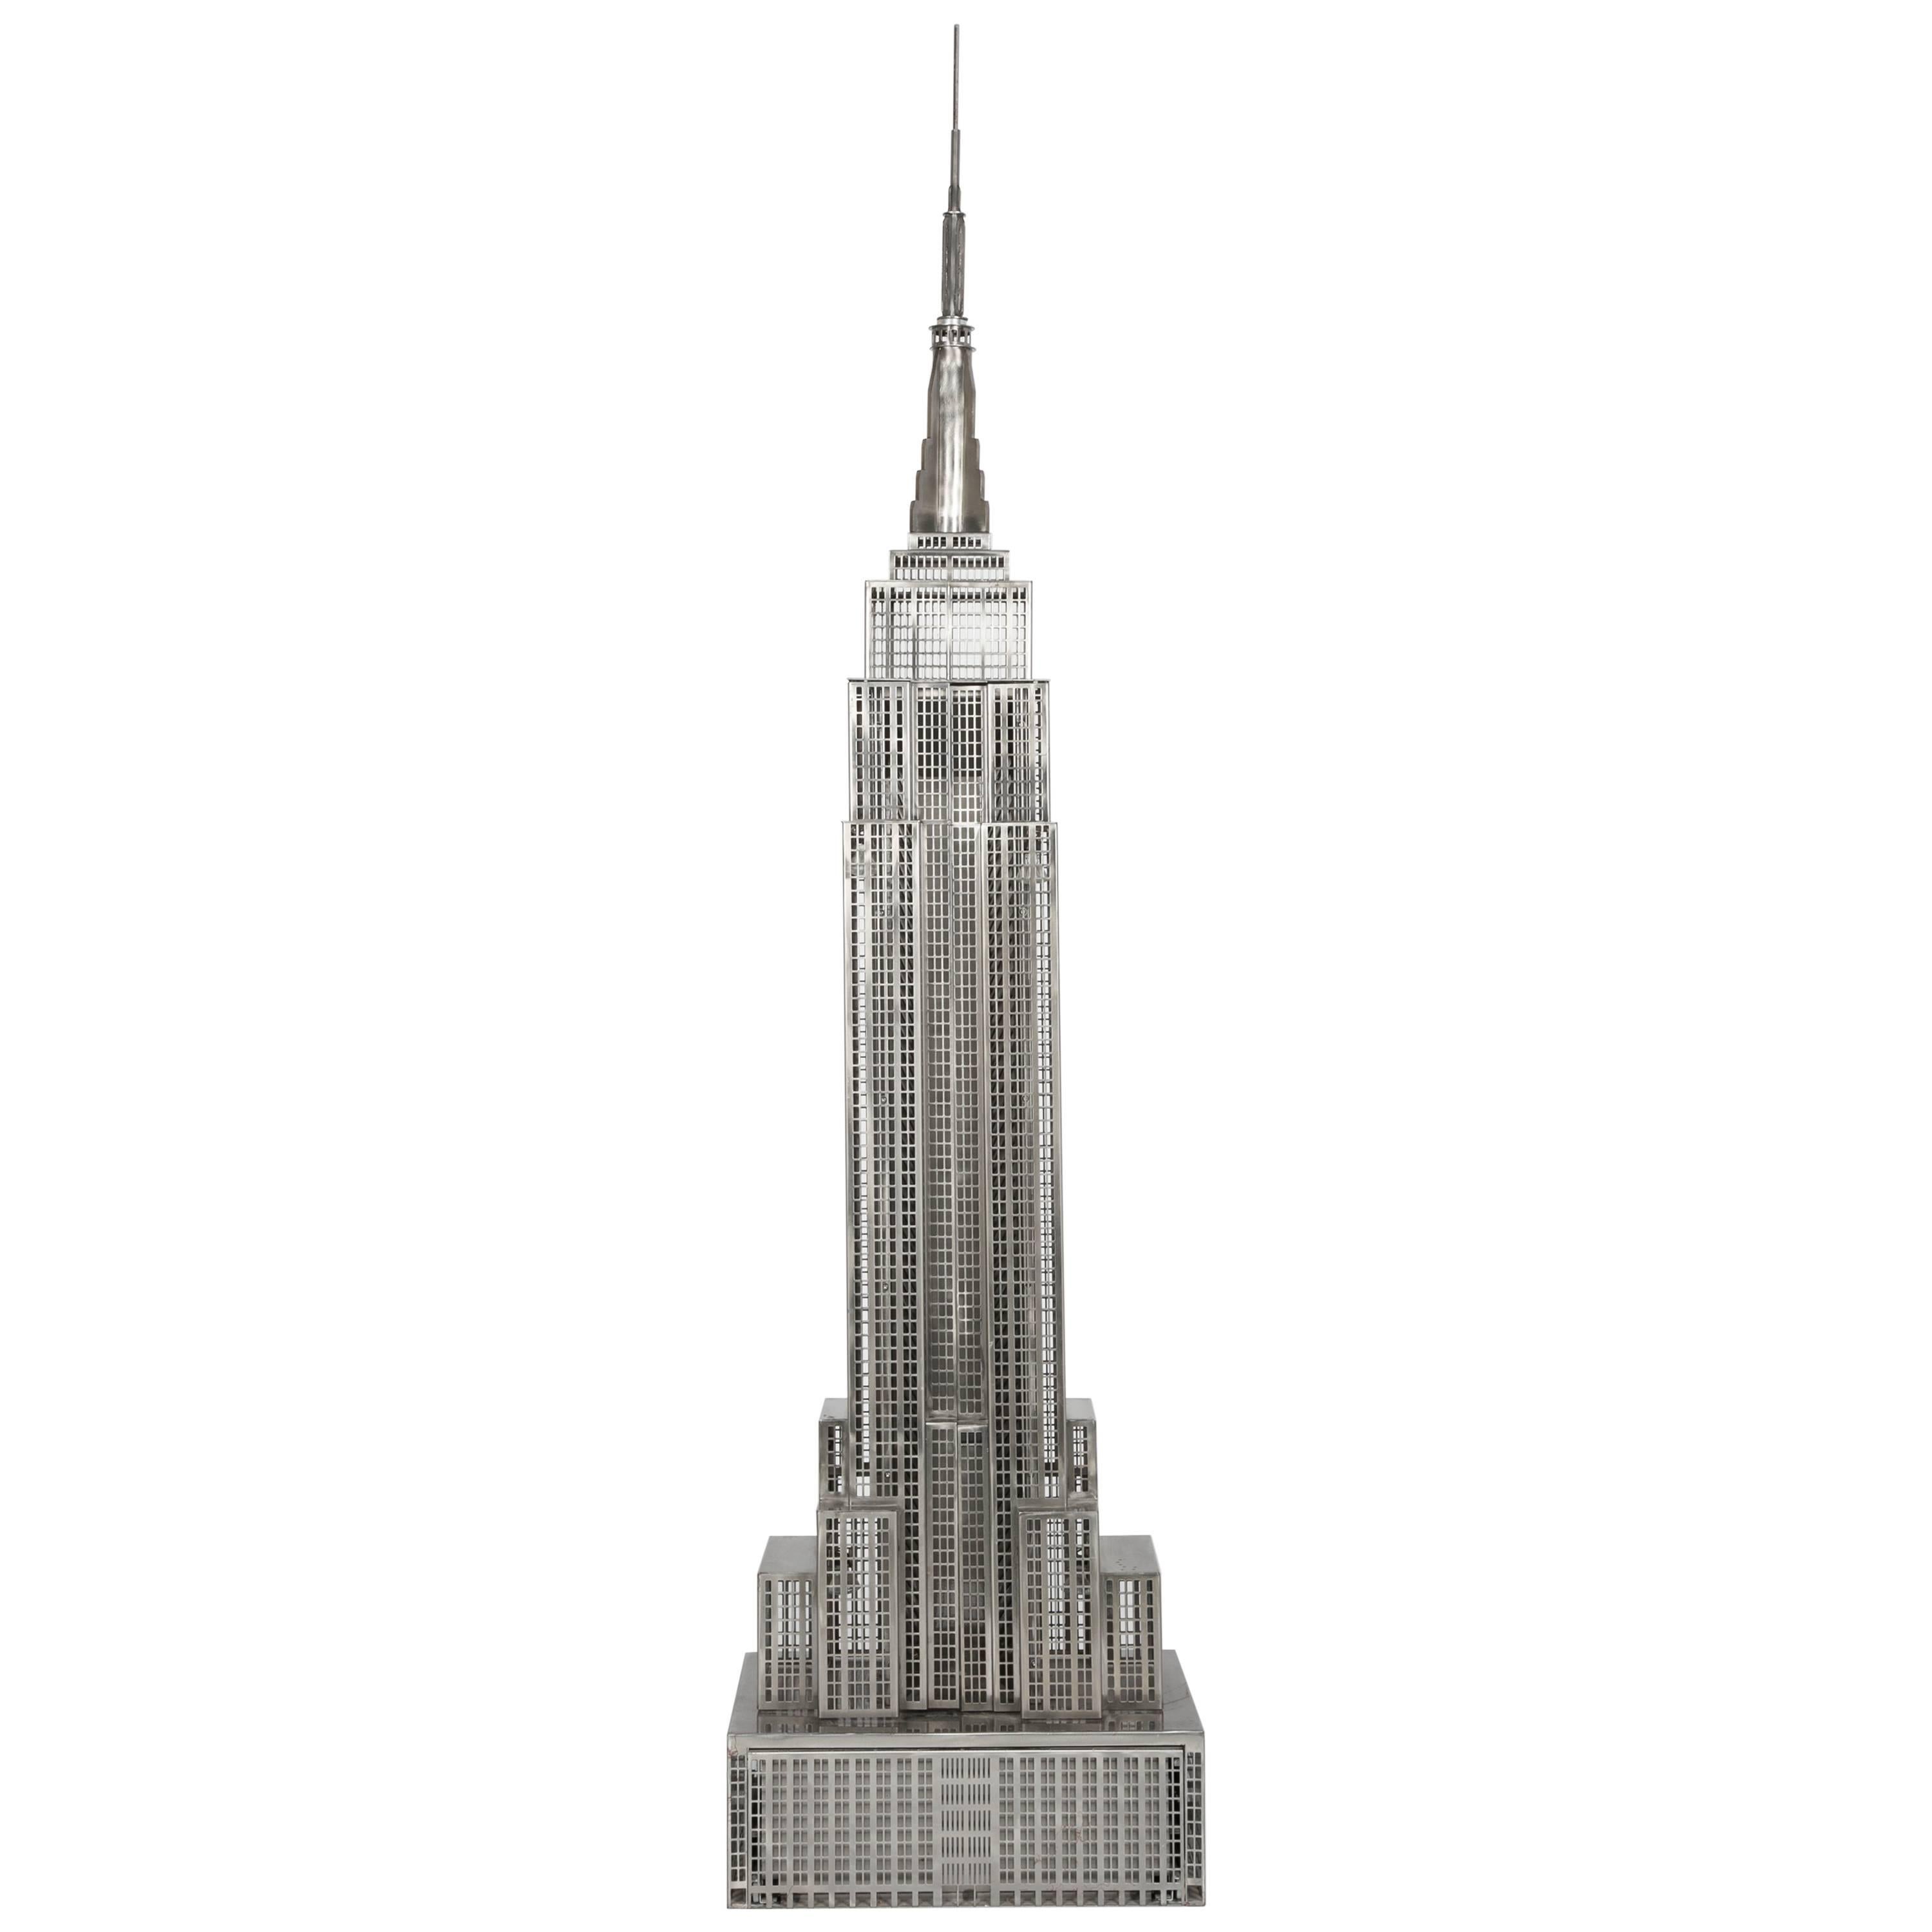 Lighted Steel Sculpture of the Empire State Building